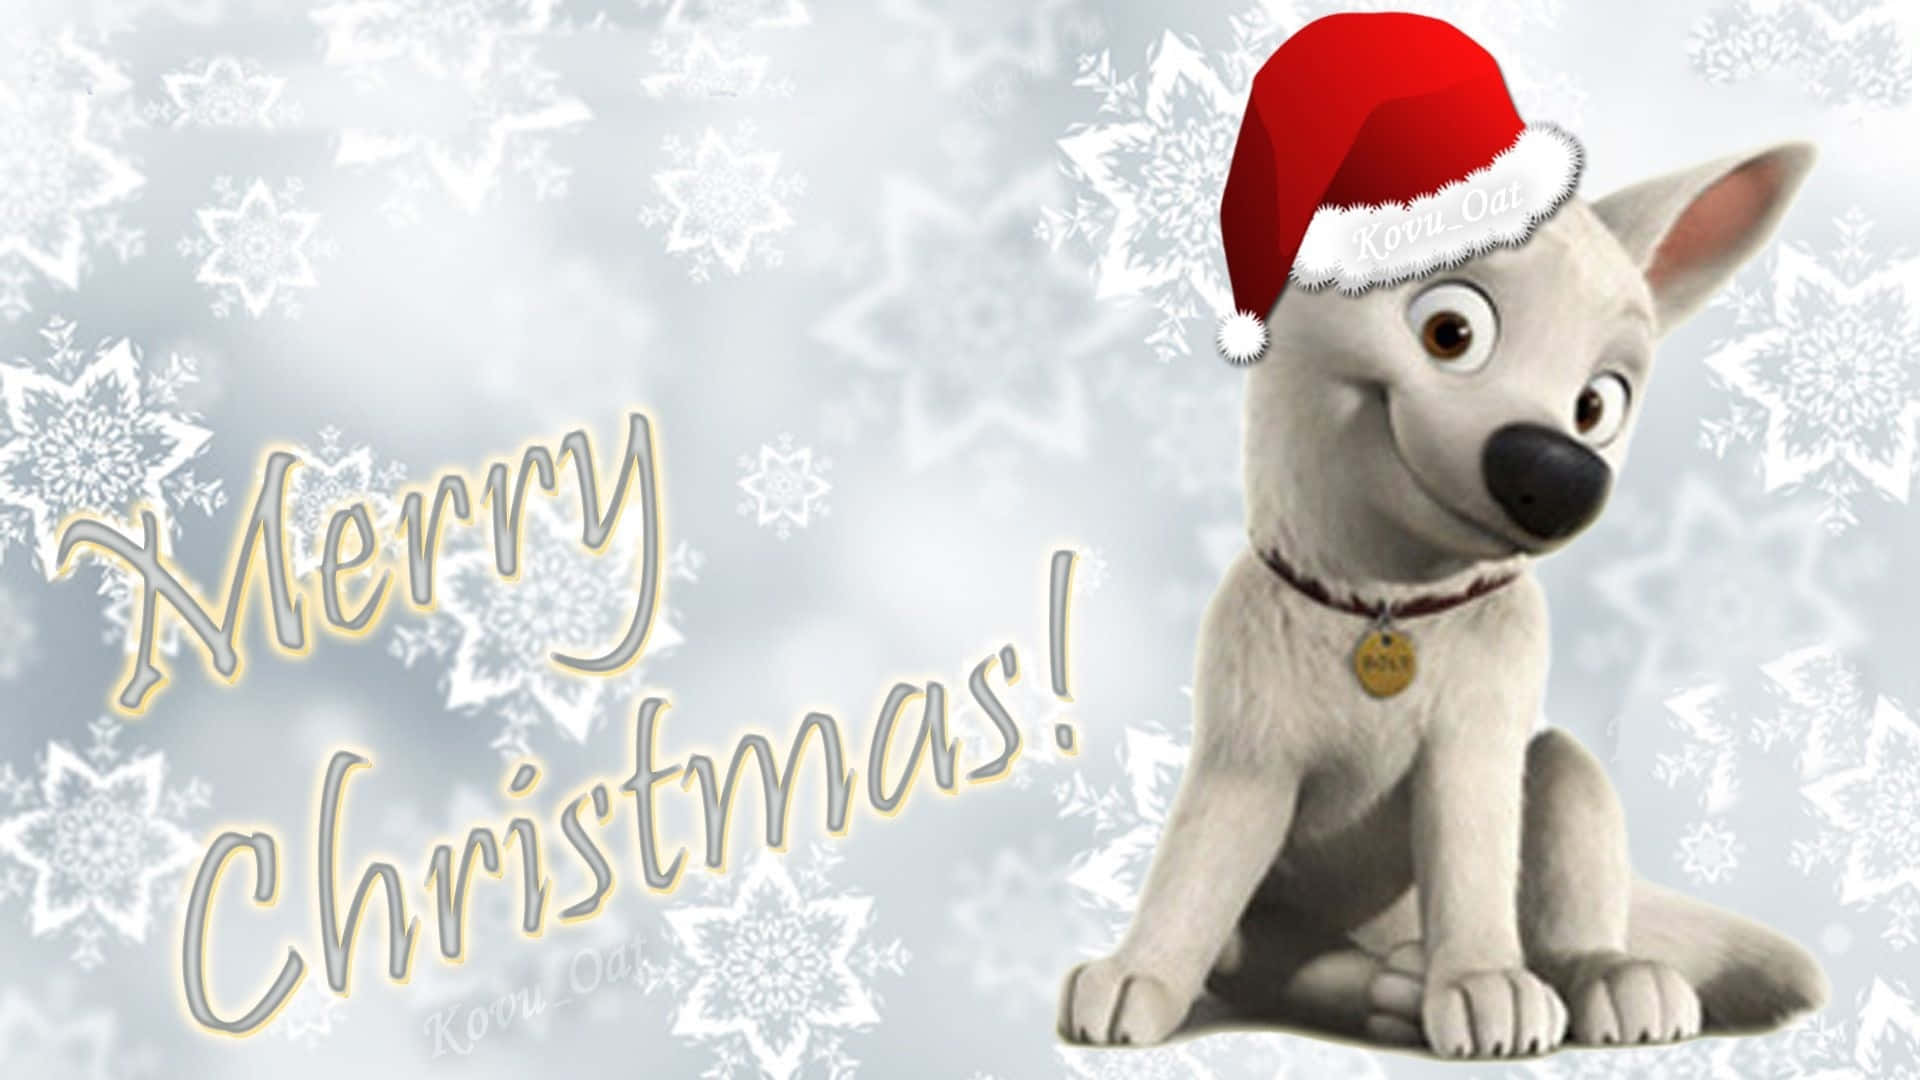 Dog Christmas Bolt Cartoon Character Smiling Picture